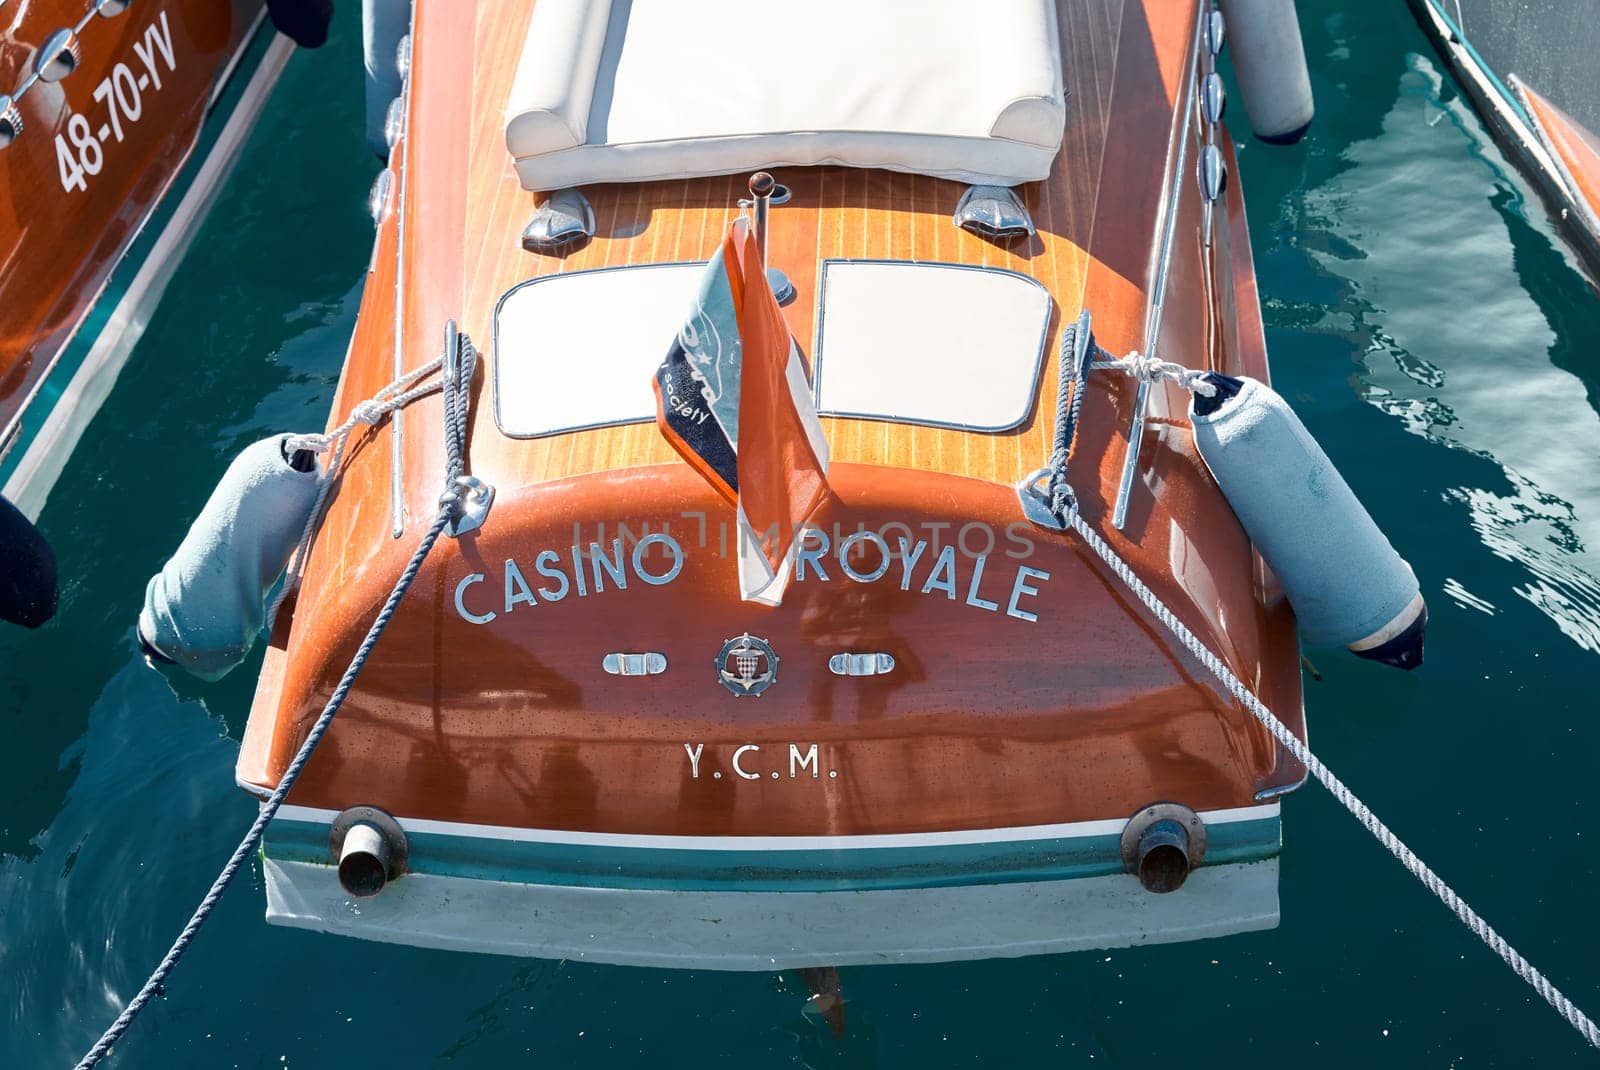 Monaco, Monte Carlo, 28 September 2022 - Vintage motorboat Riva Casino Royal on the famous motorboat exhibition in the principality, the most expensive boats for the richest people around the world. High quality photo